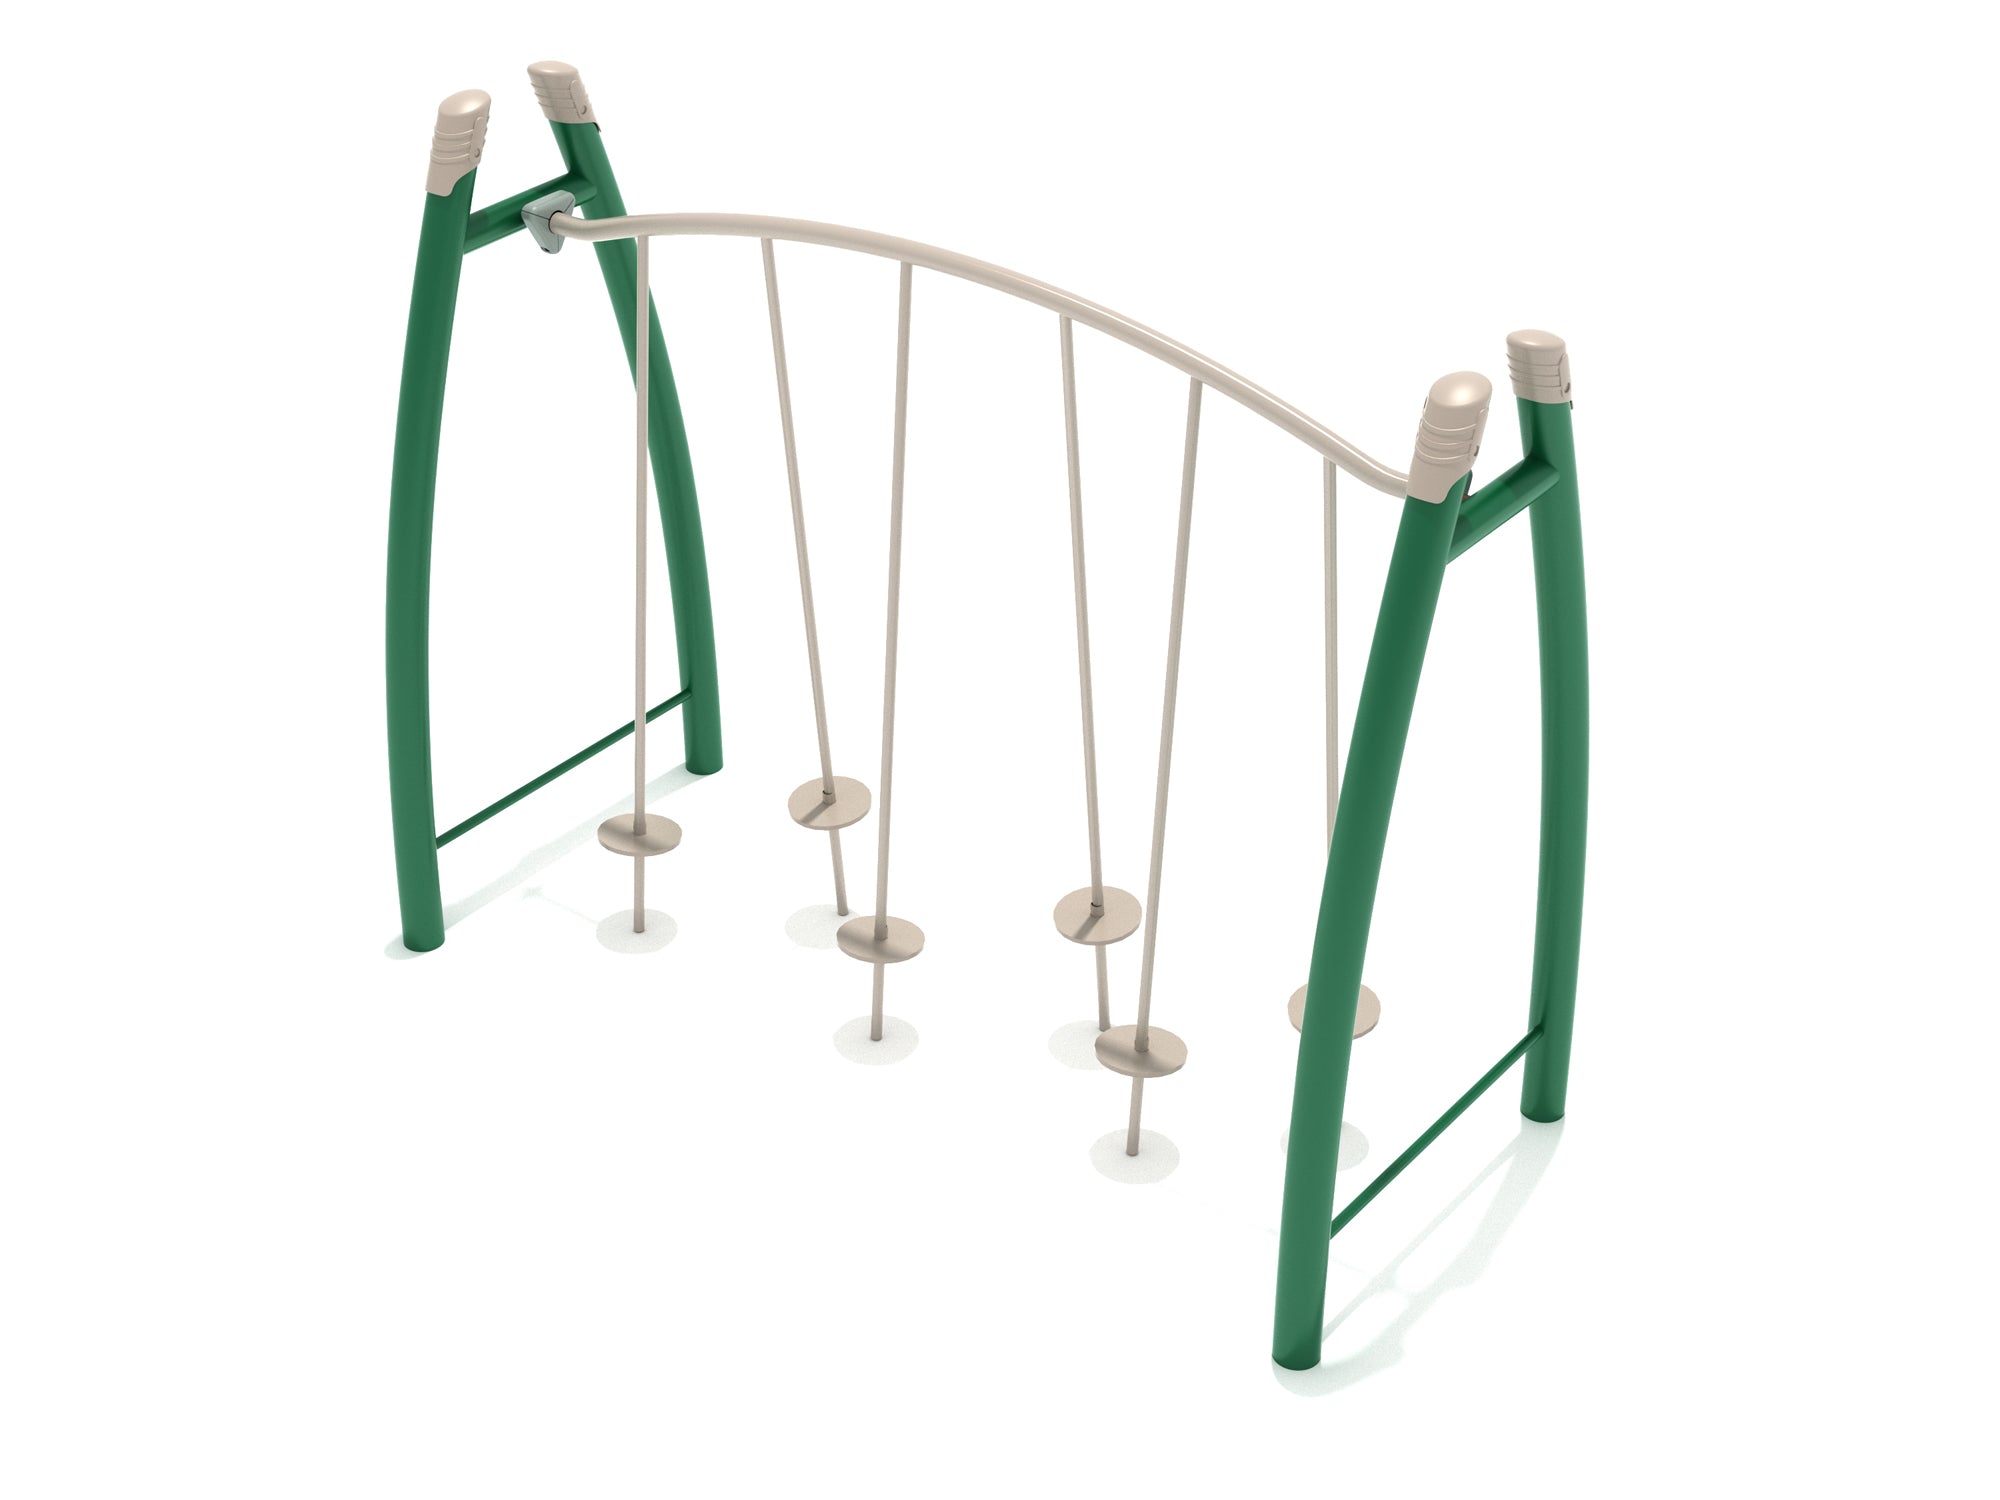 Playground-Equipment-Commercial-Curved-Post-Tilted-Lily-Pad-Bridge